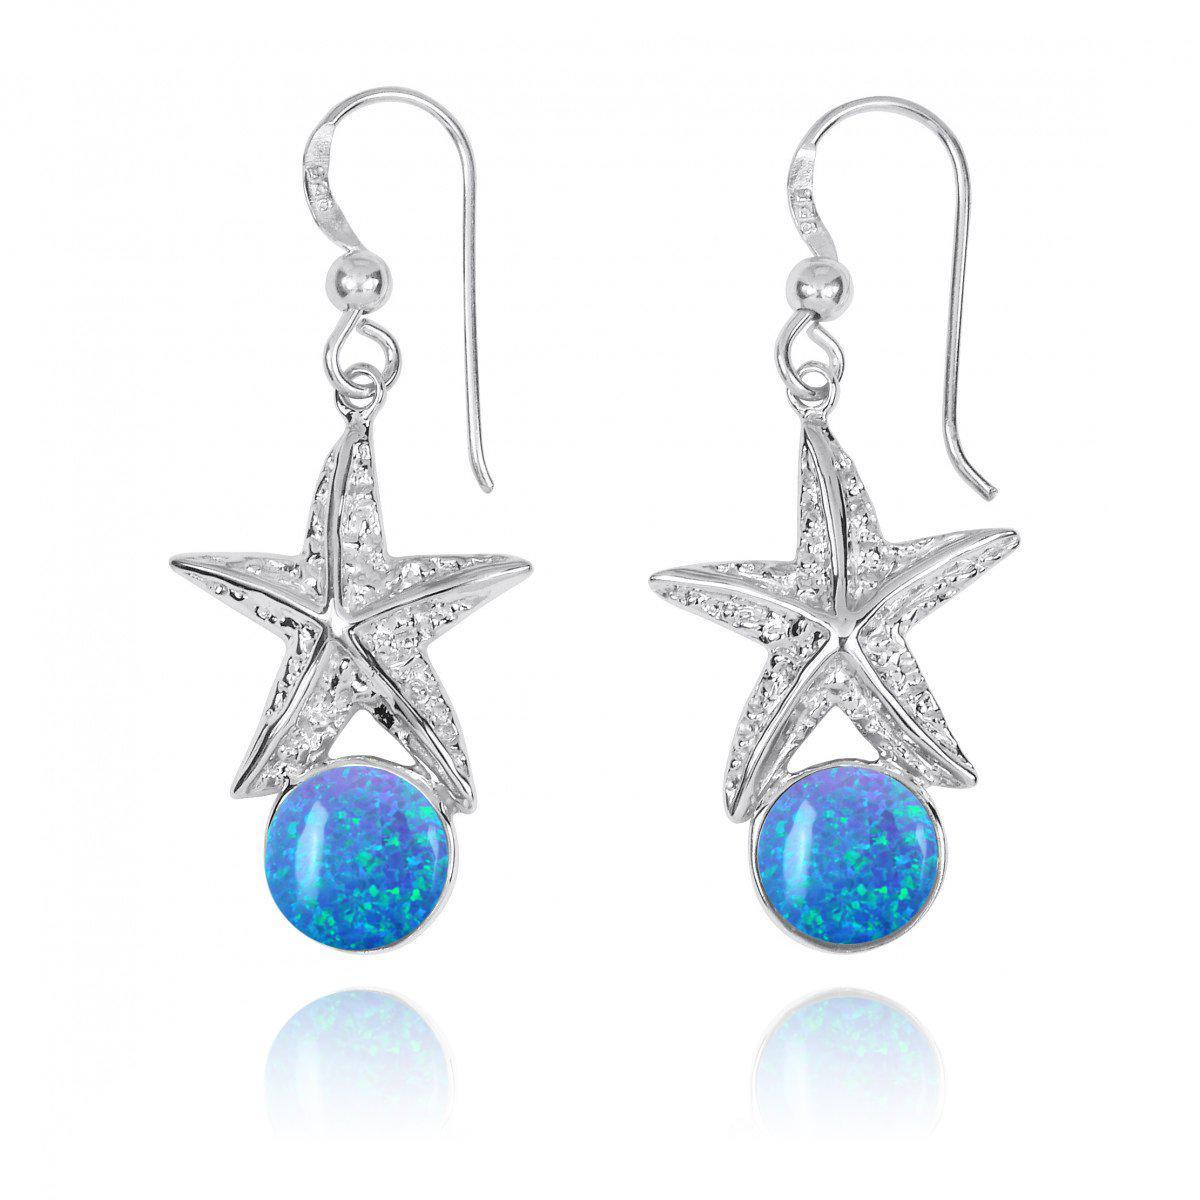 Sterling Silver Starfish French Wire Earrings with Round Blue Opal